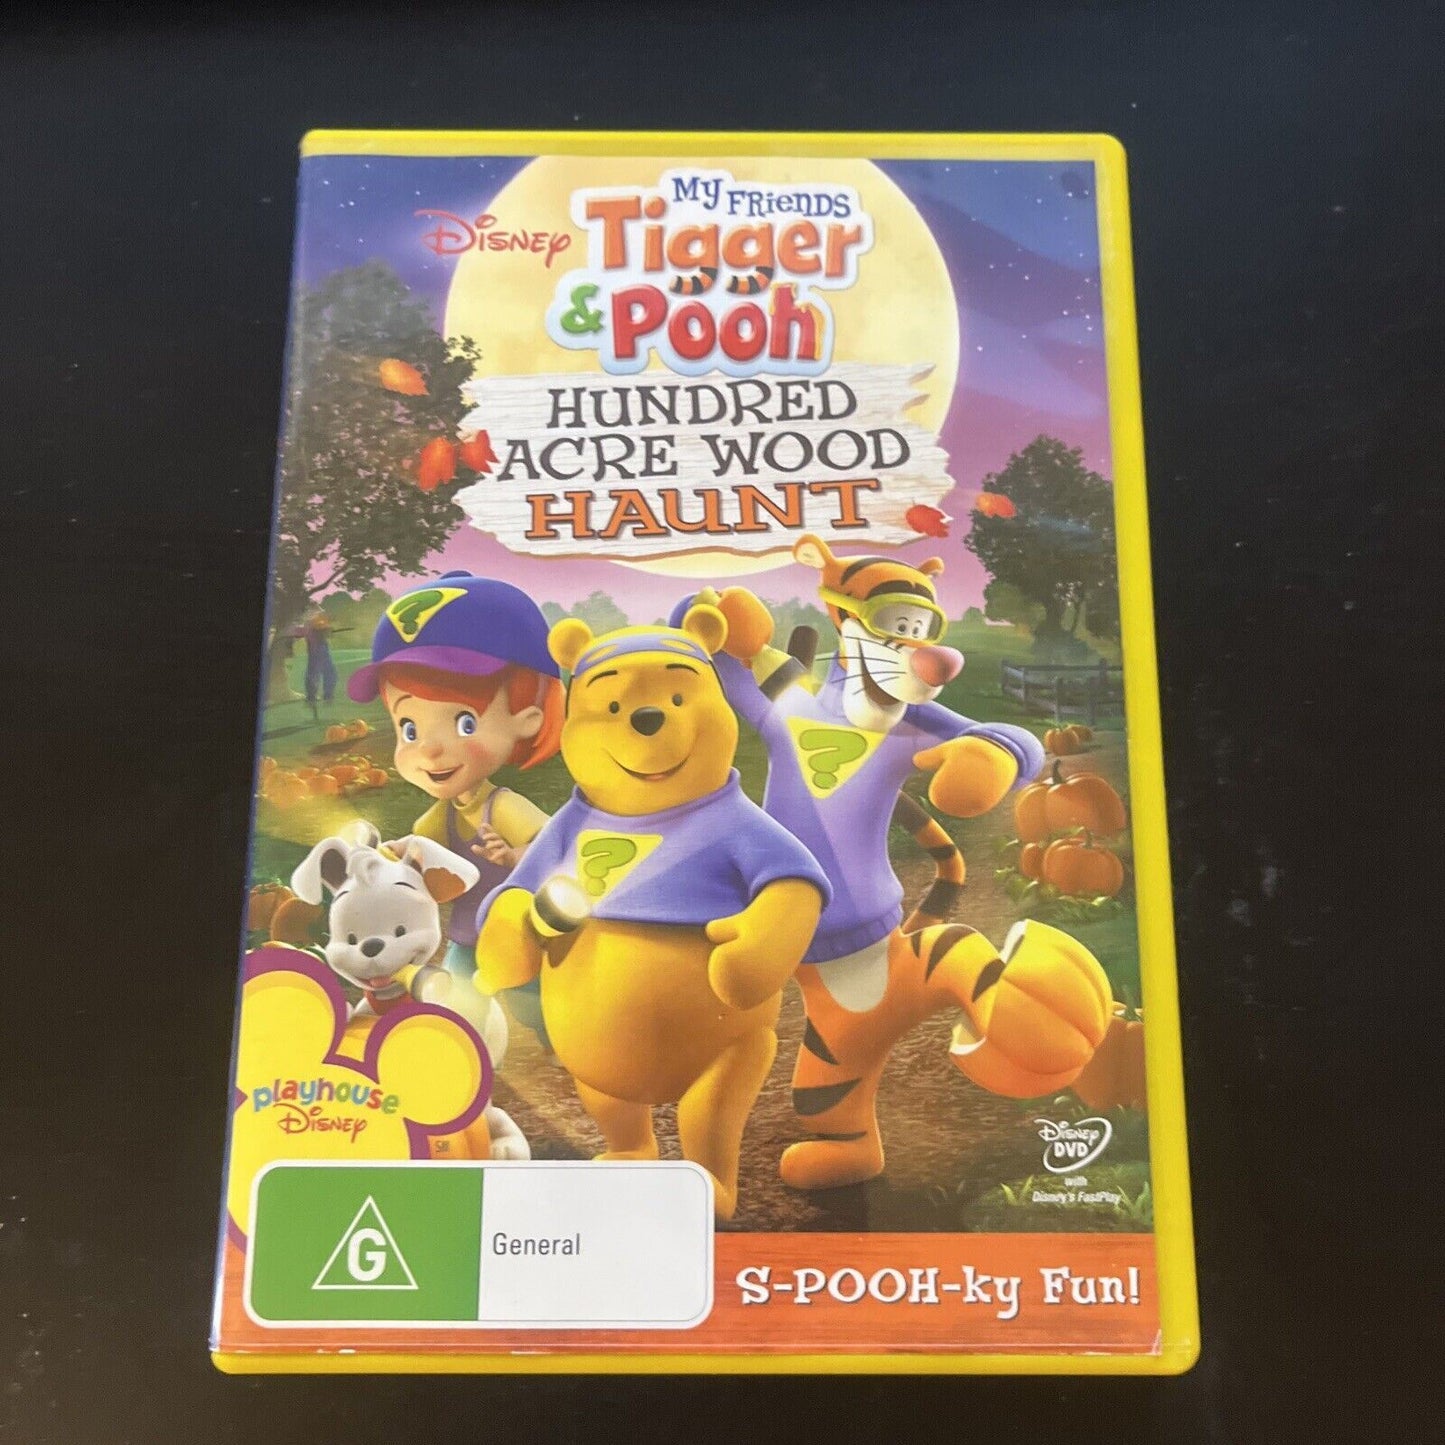 My Friends Tigger and Pooh: Hundred Acre Wood Haunt (DVD, 2007) Region 4